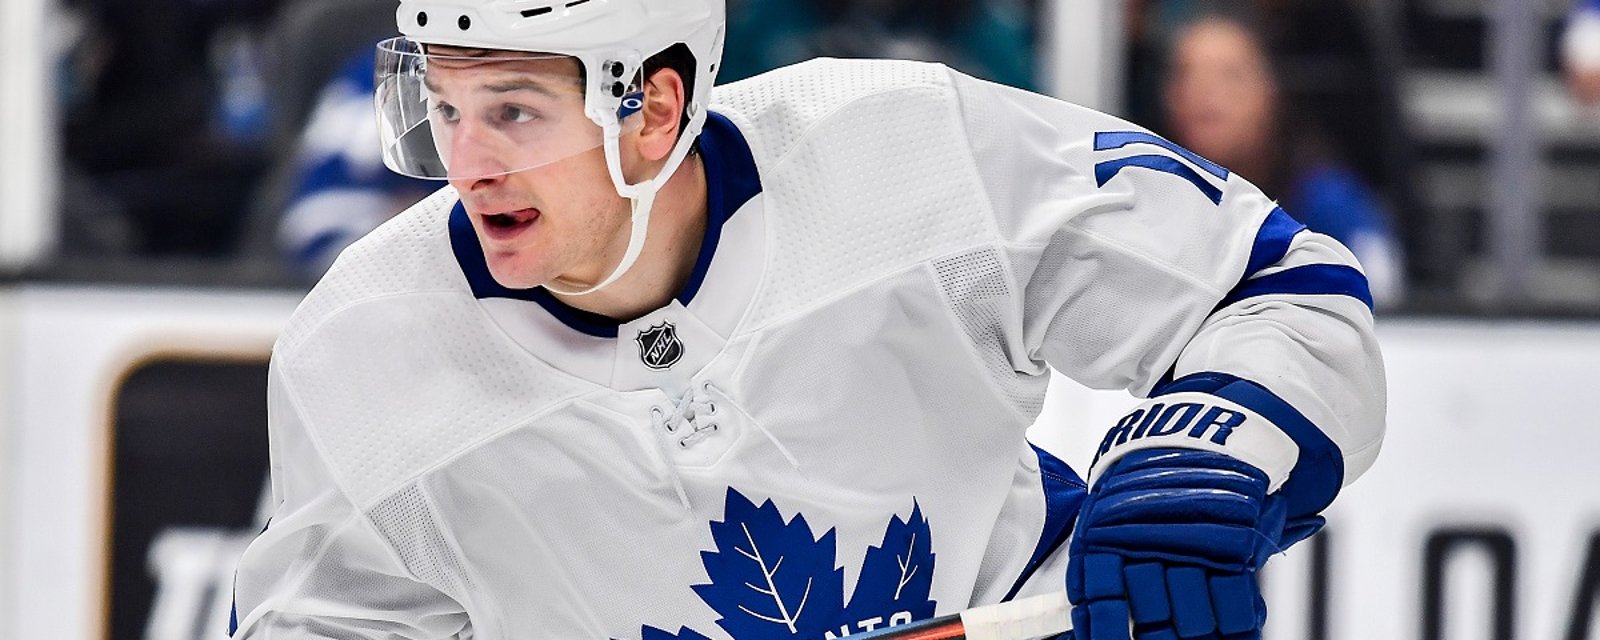 Rumor: Zach Hyman may have played his last game as a Maple Leaf.